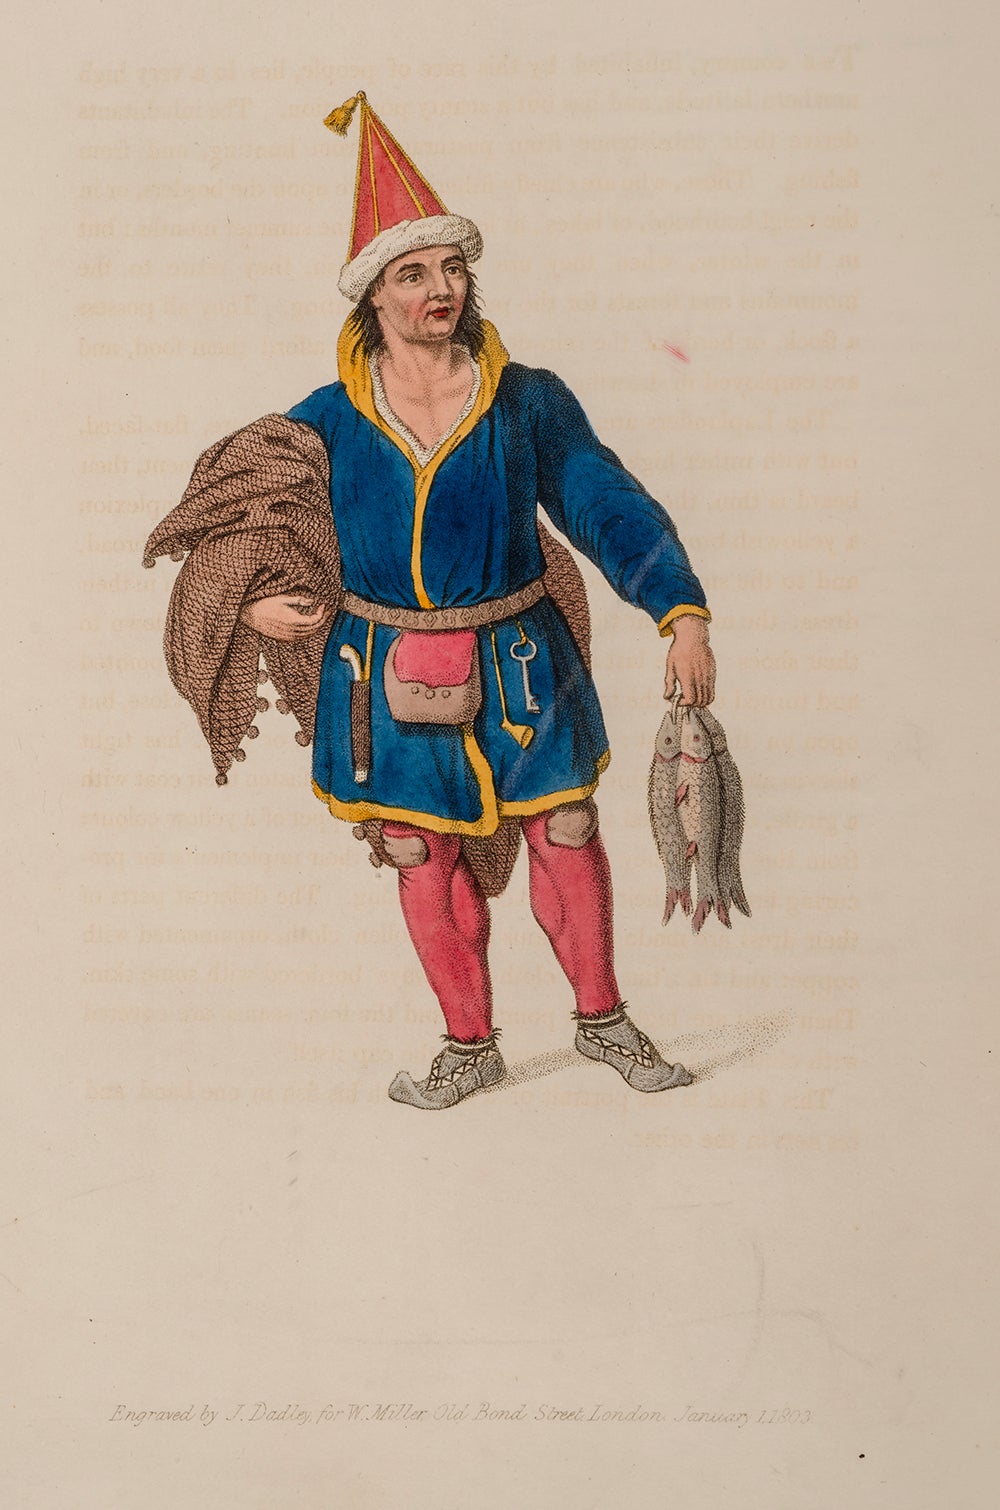 ALEXANDER, William - Costume of the Russian Empire, the